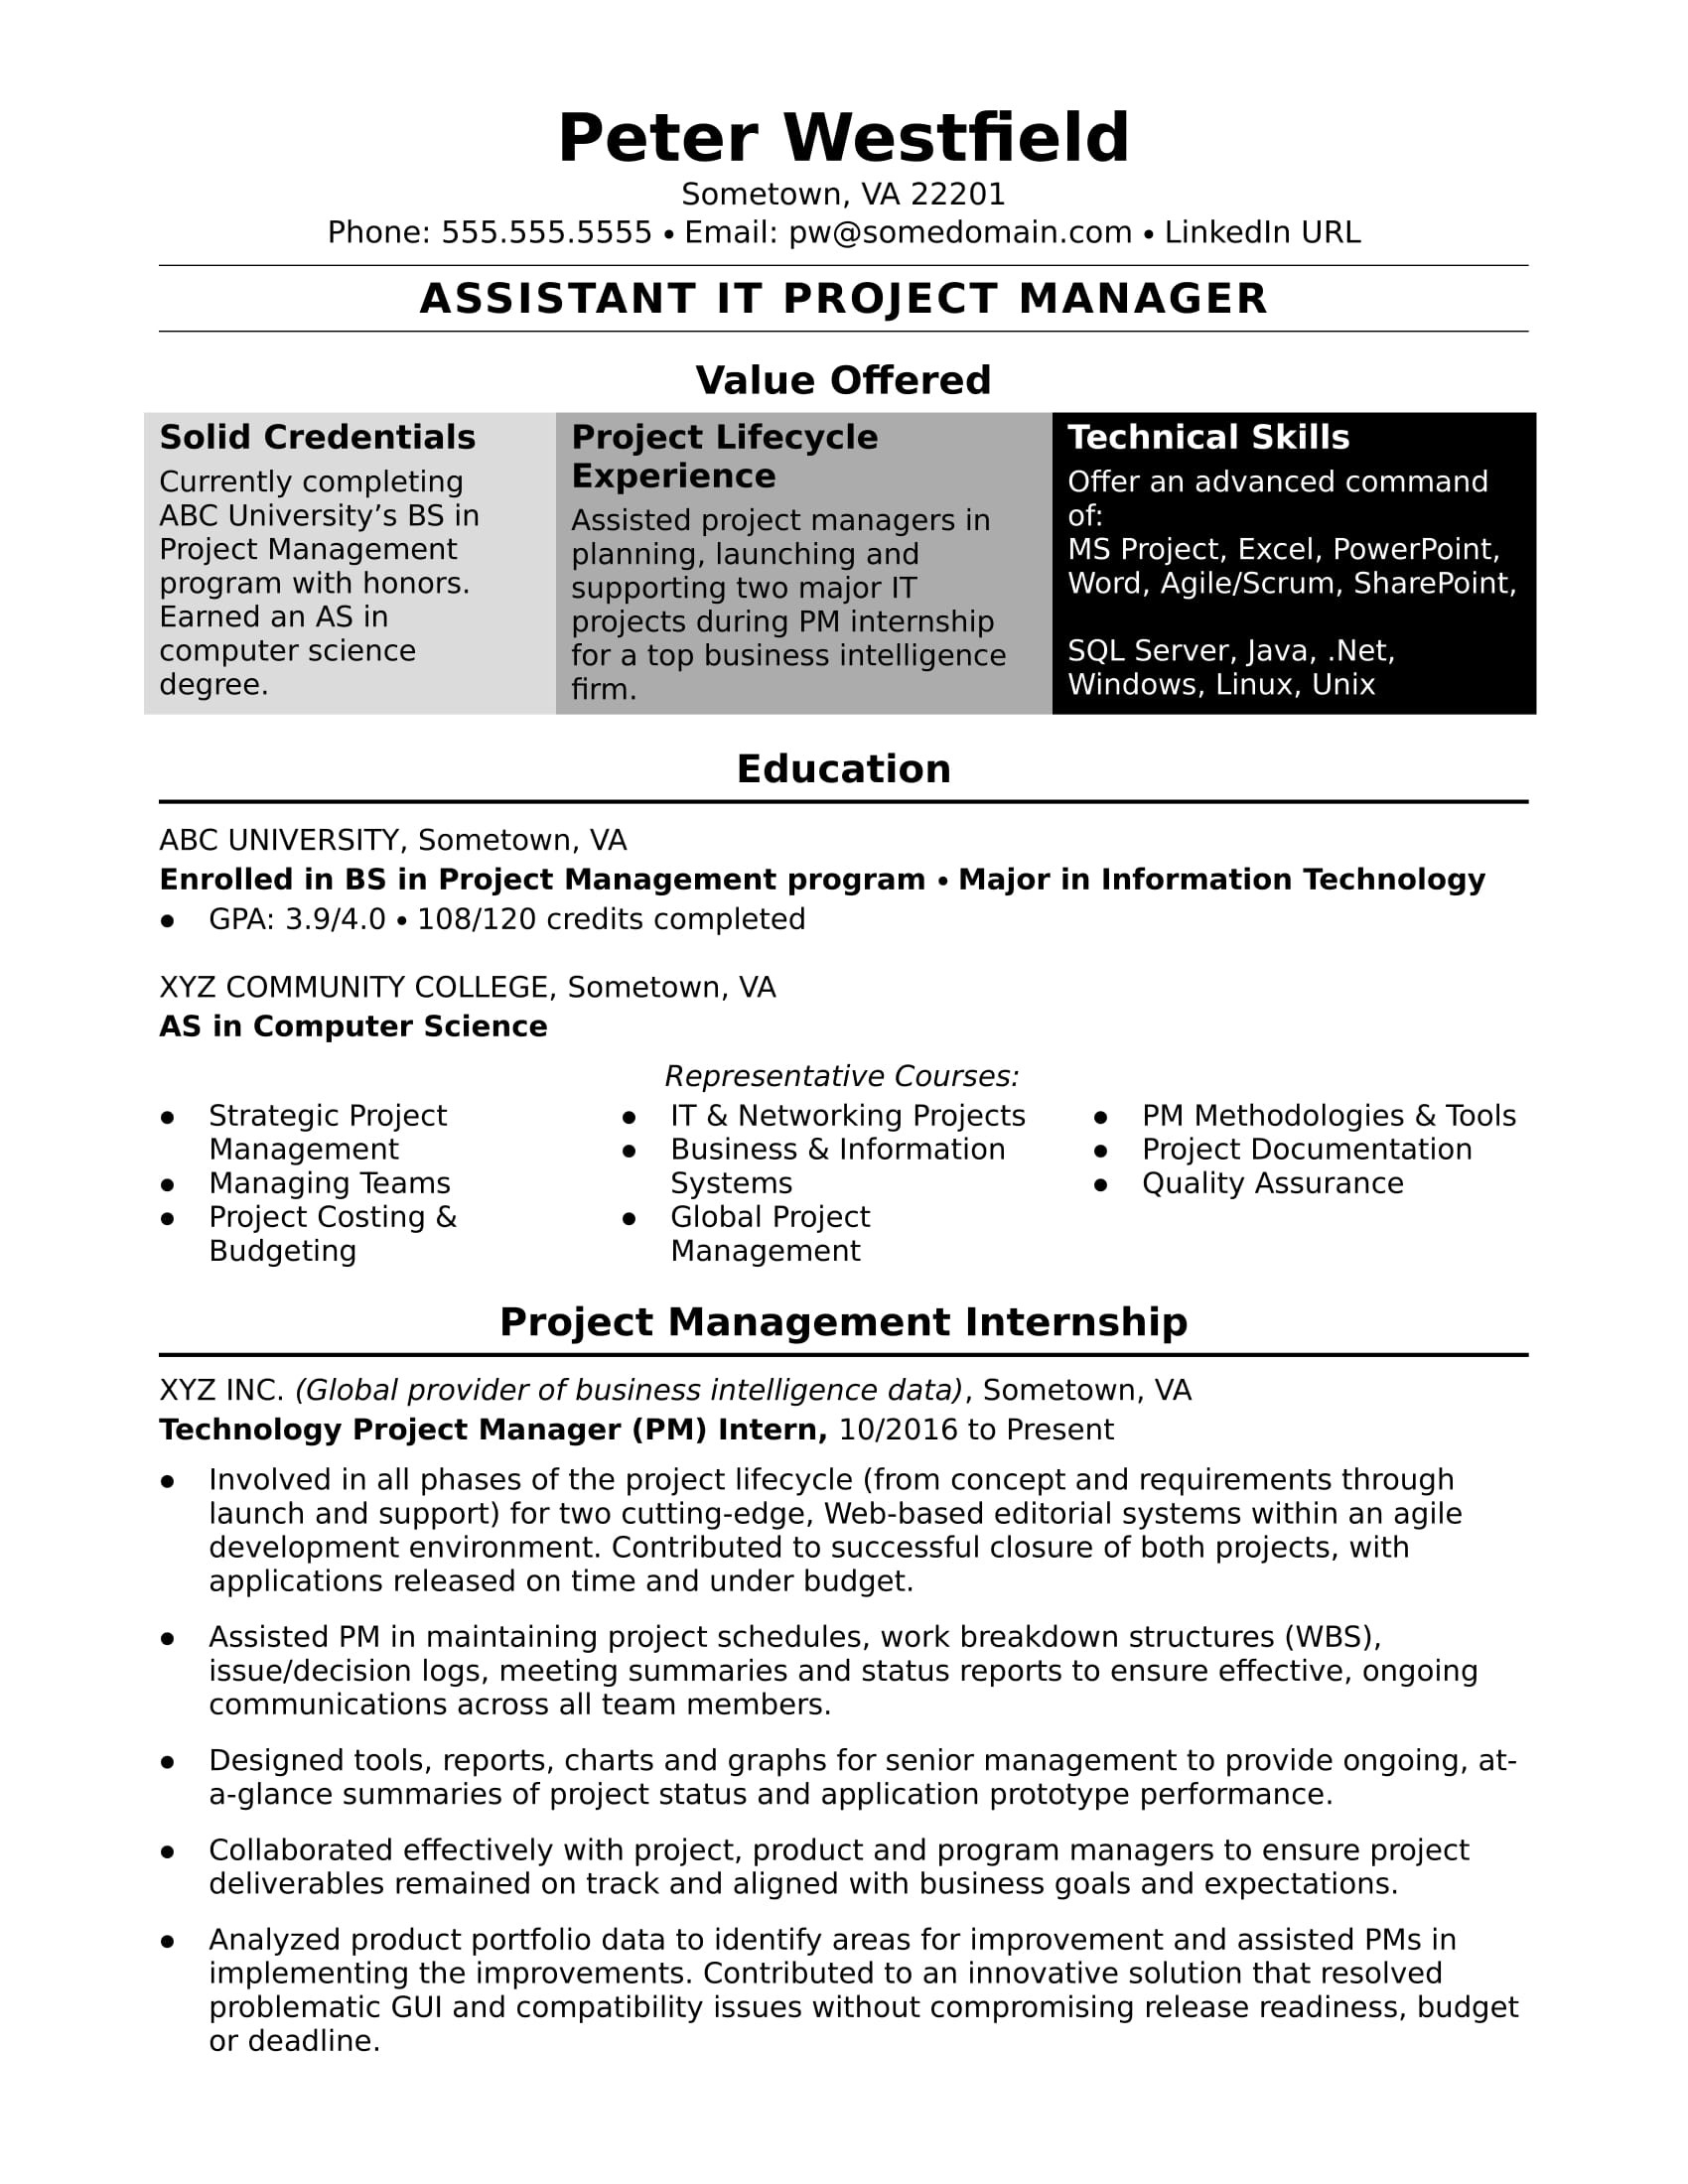 Sample Resume for Program Planning and Control Manager Sample Resume for An assistant It Project Manager Monster.com